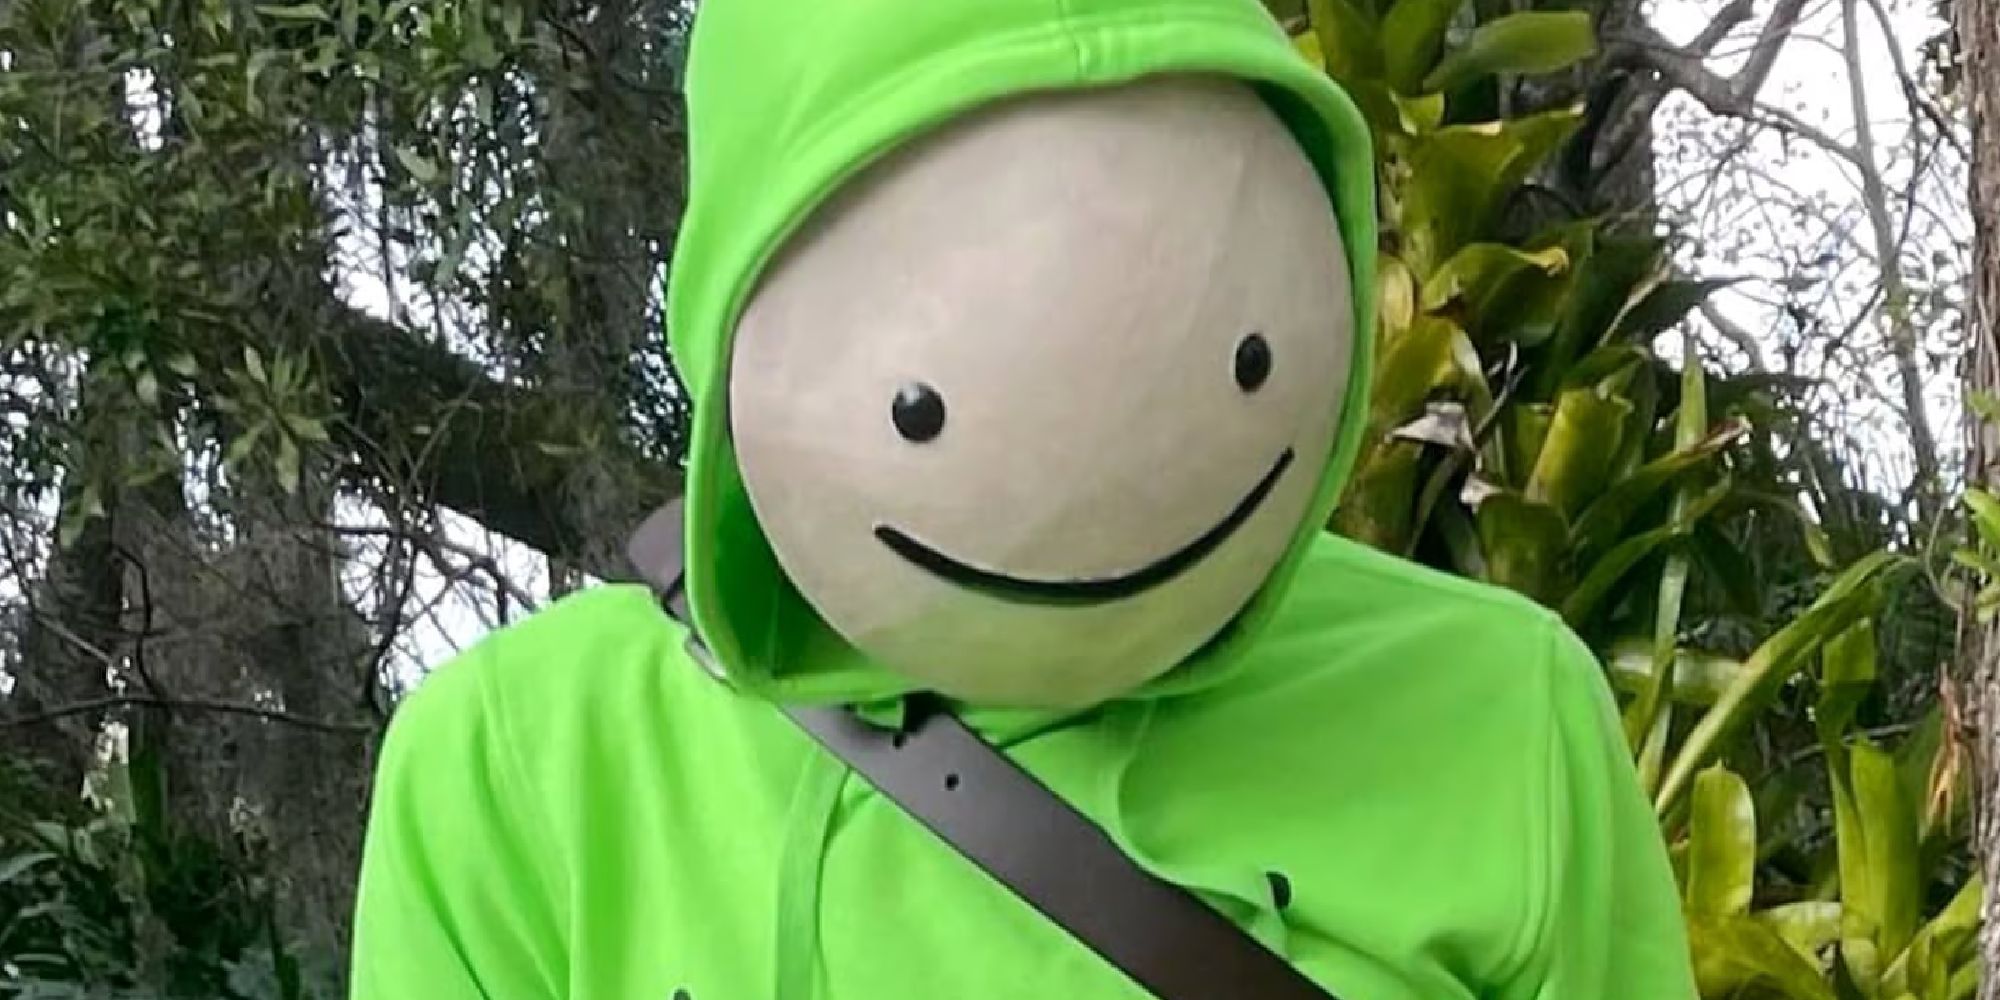 Dream YouTuber standing in front of trees in a lime green hoodie with his iconic white circular mask with a smiley face painted on top